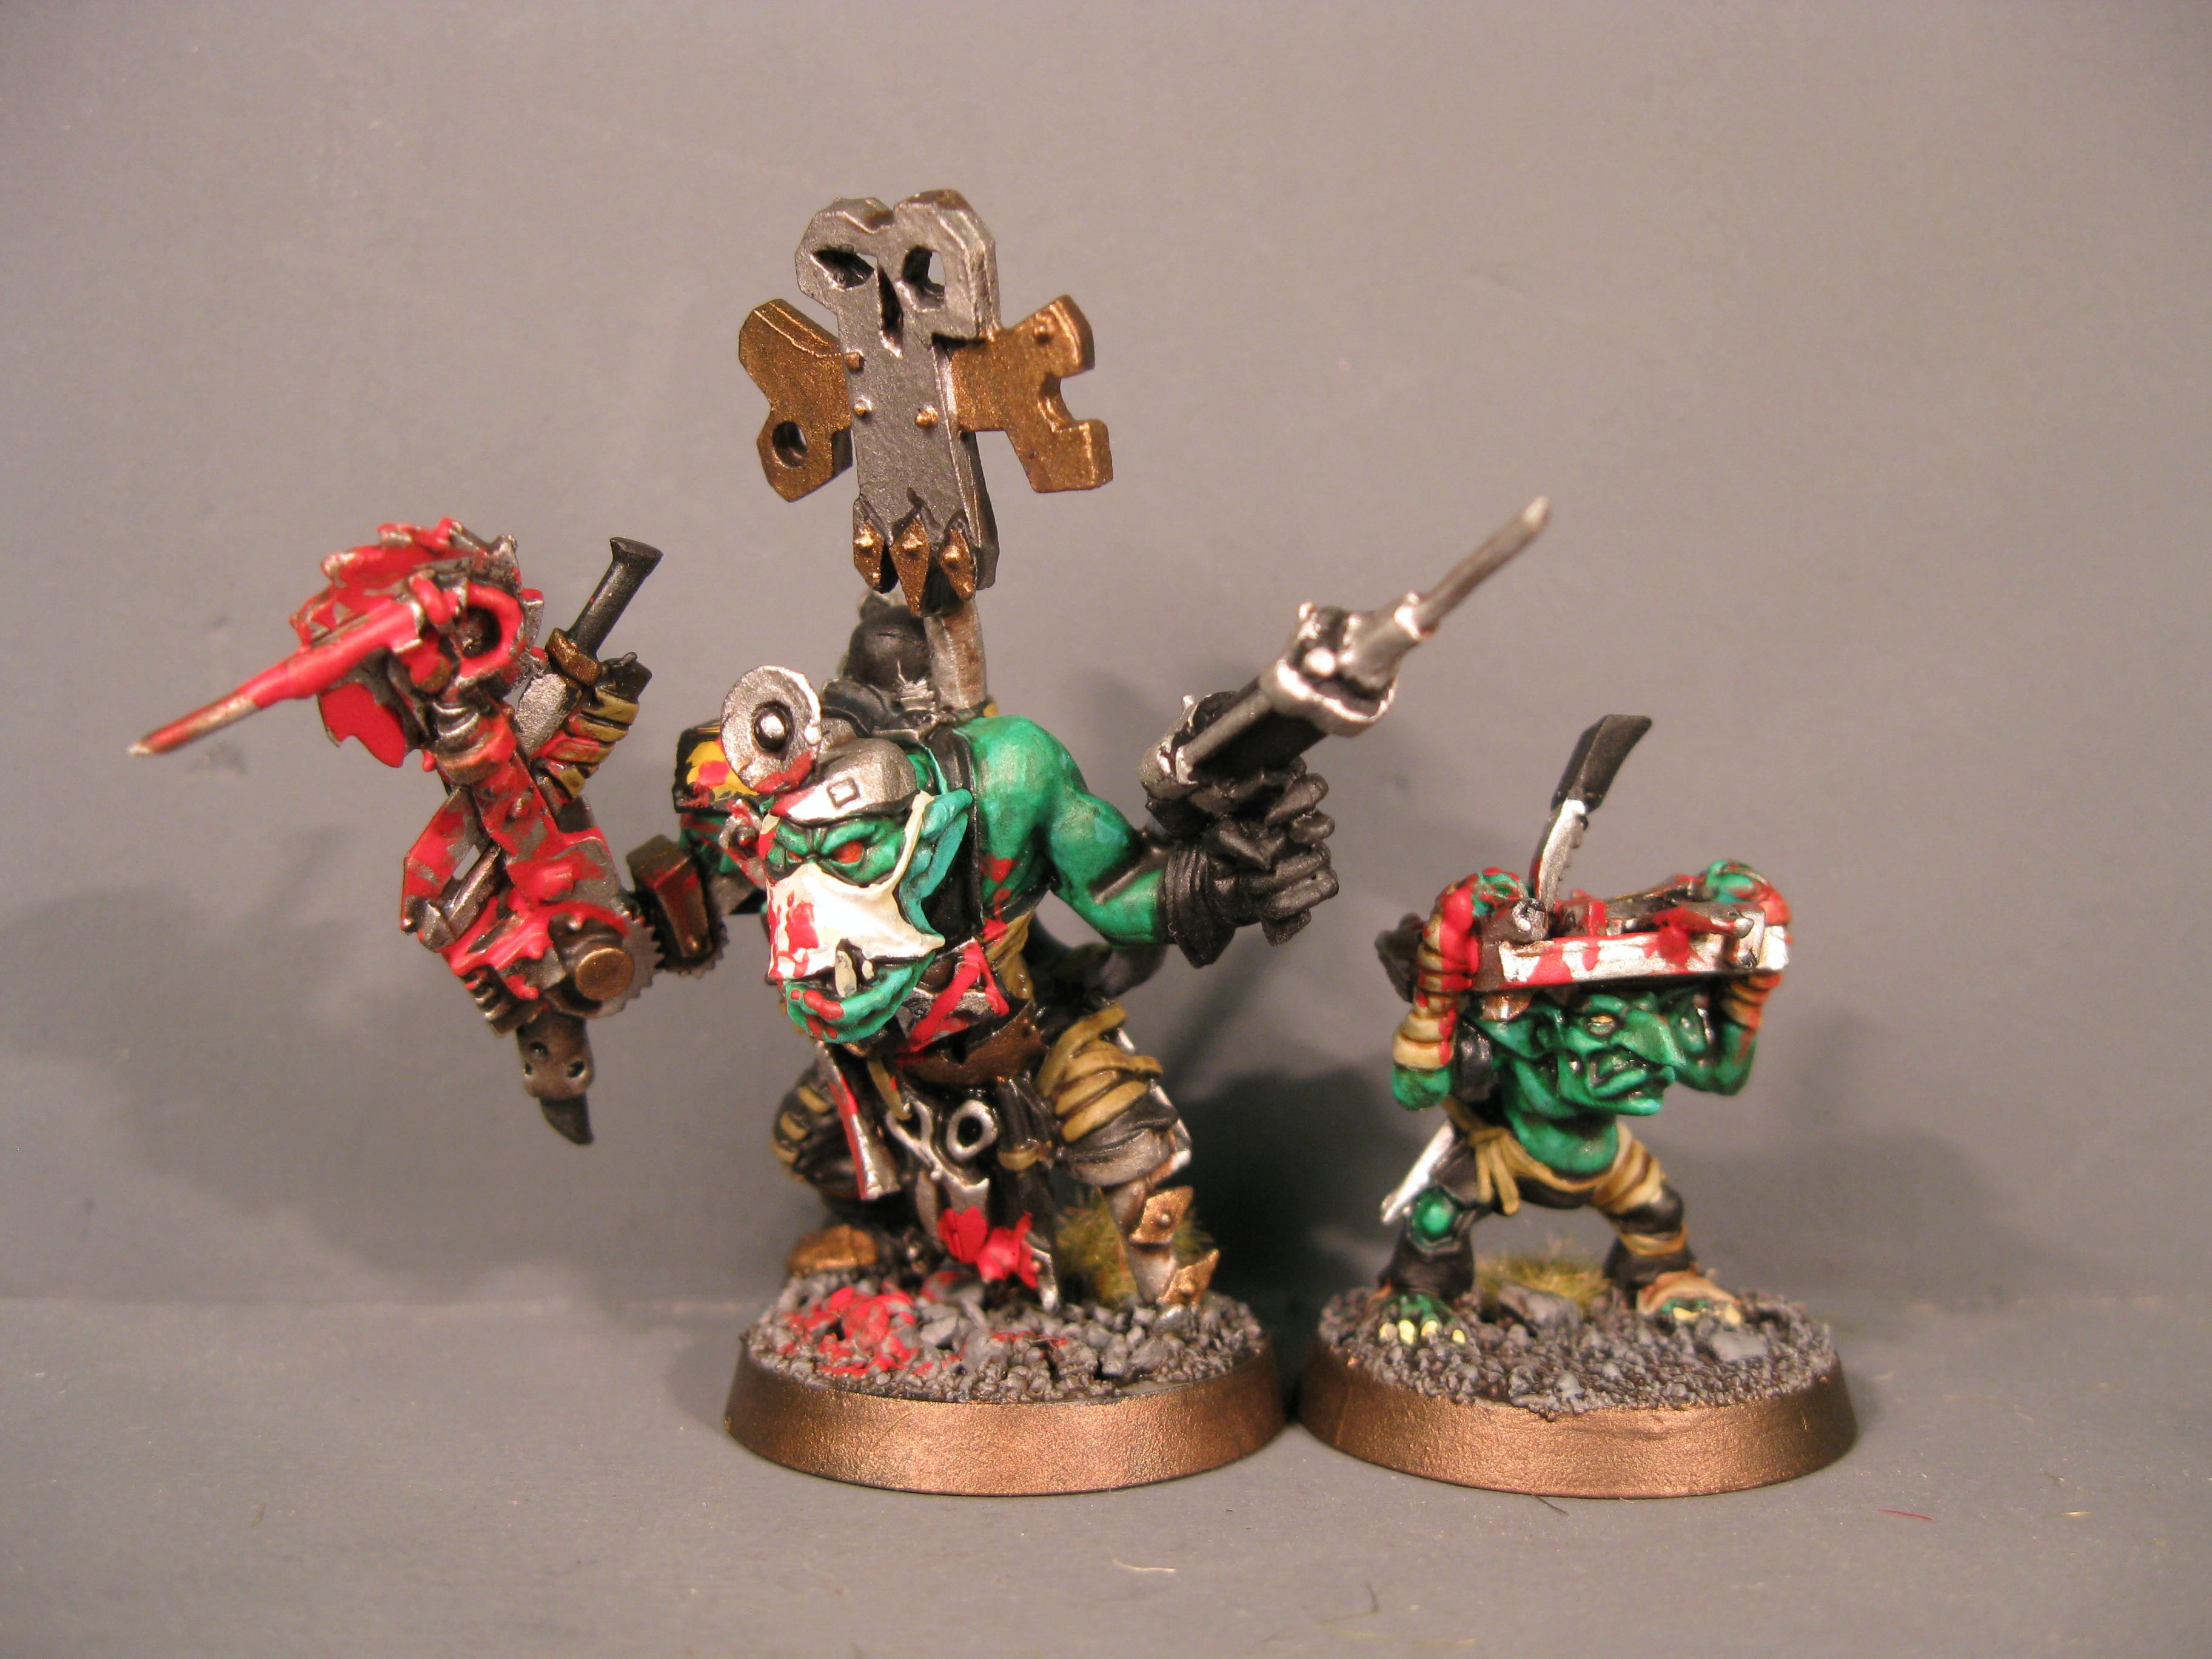 Grot Orderly, Mad Dok, Orcs, Orks, Warhammer 40,000